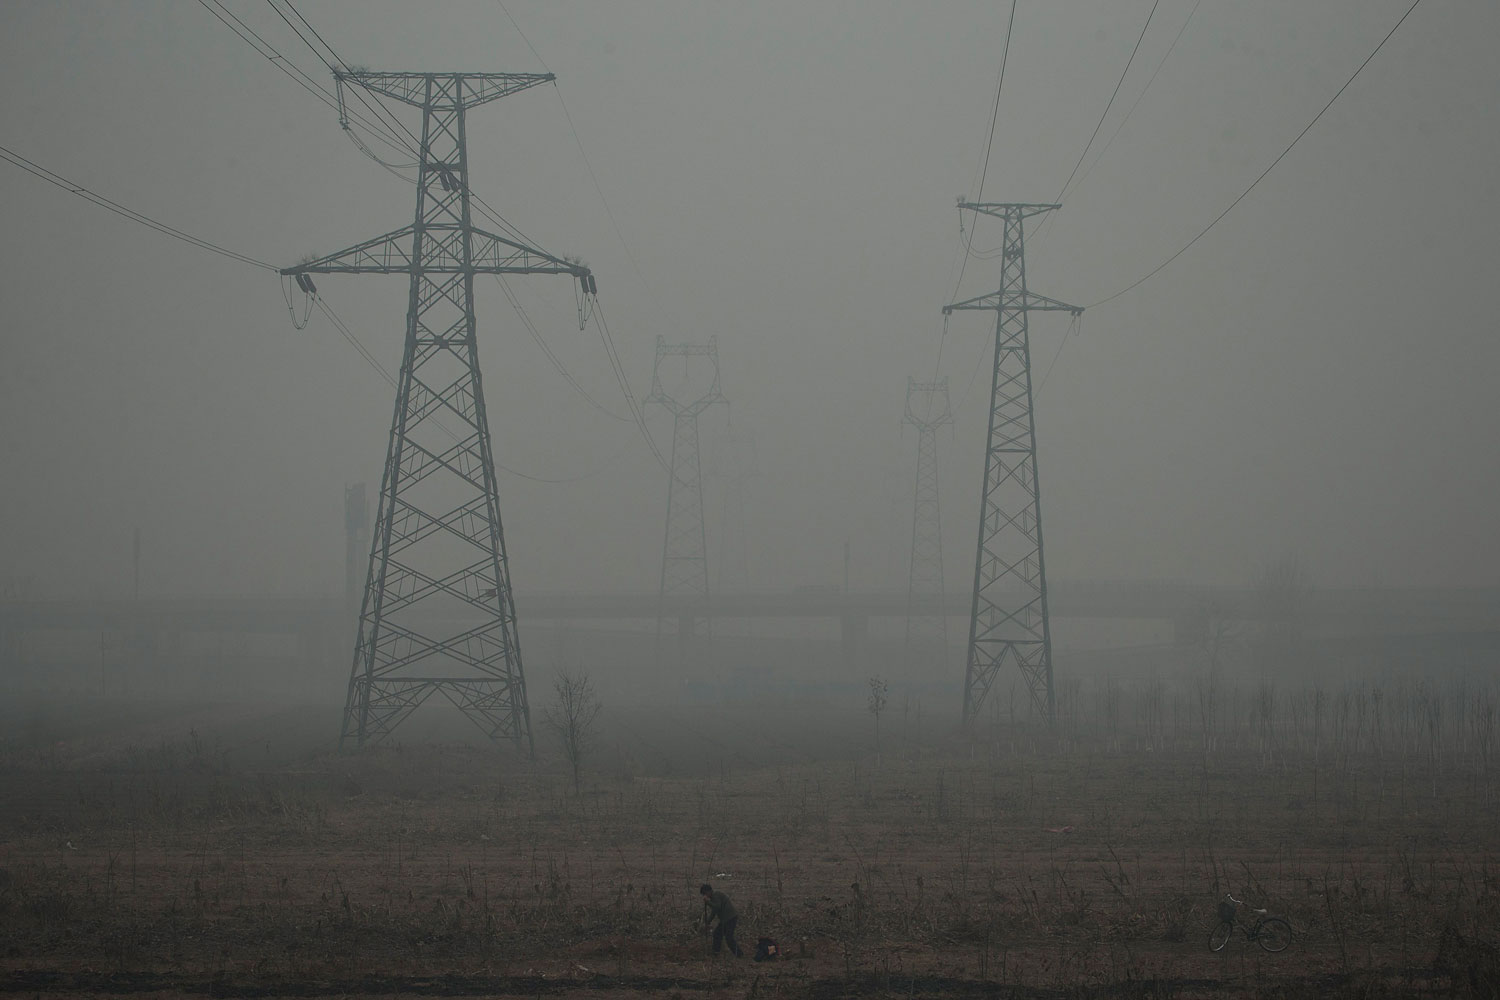 A farmer shovels in a field near electric pylons in heavy haze on a severely polluted day in Shijiazhuang, in northern China's Hebei province, Feb. 26, 2014.